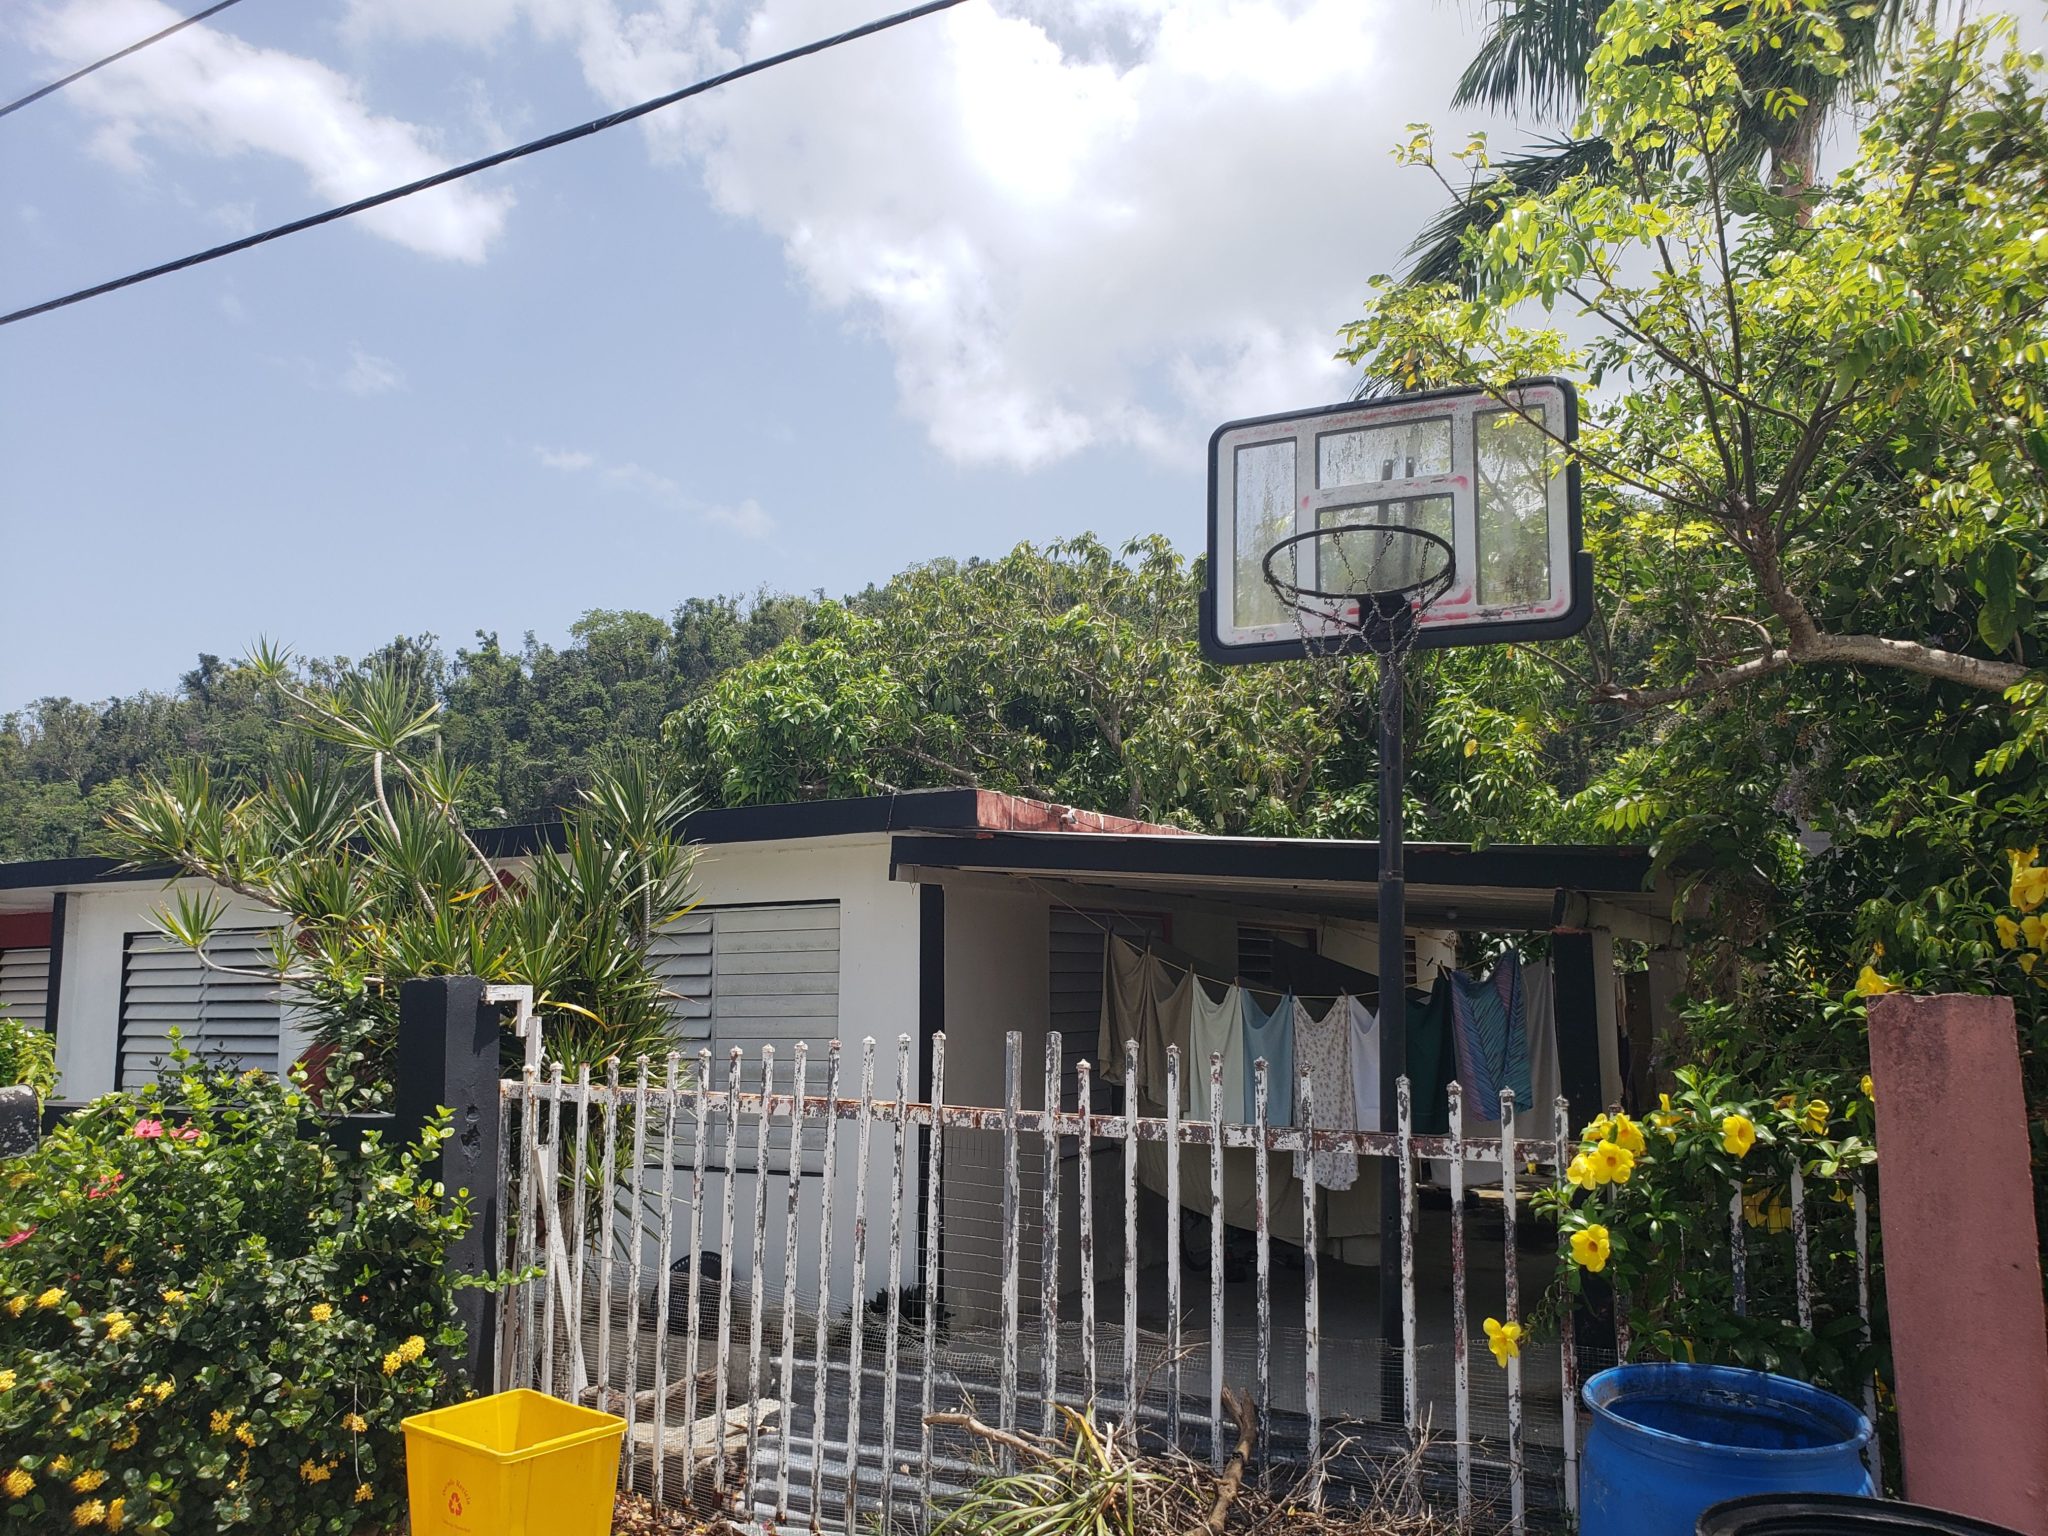 a basketball hoop in front of a house